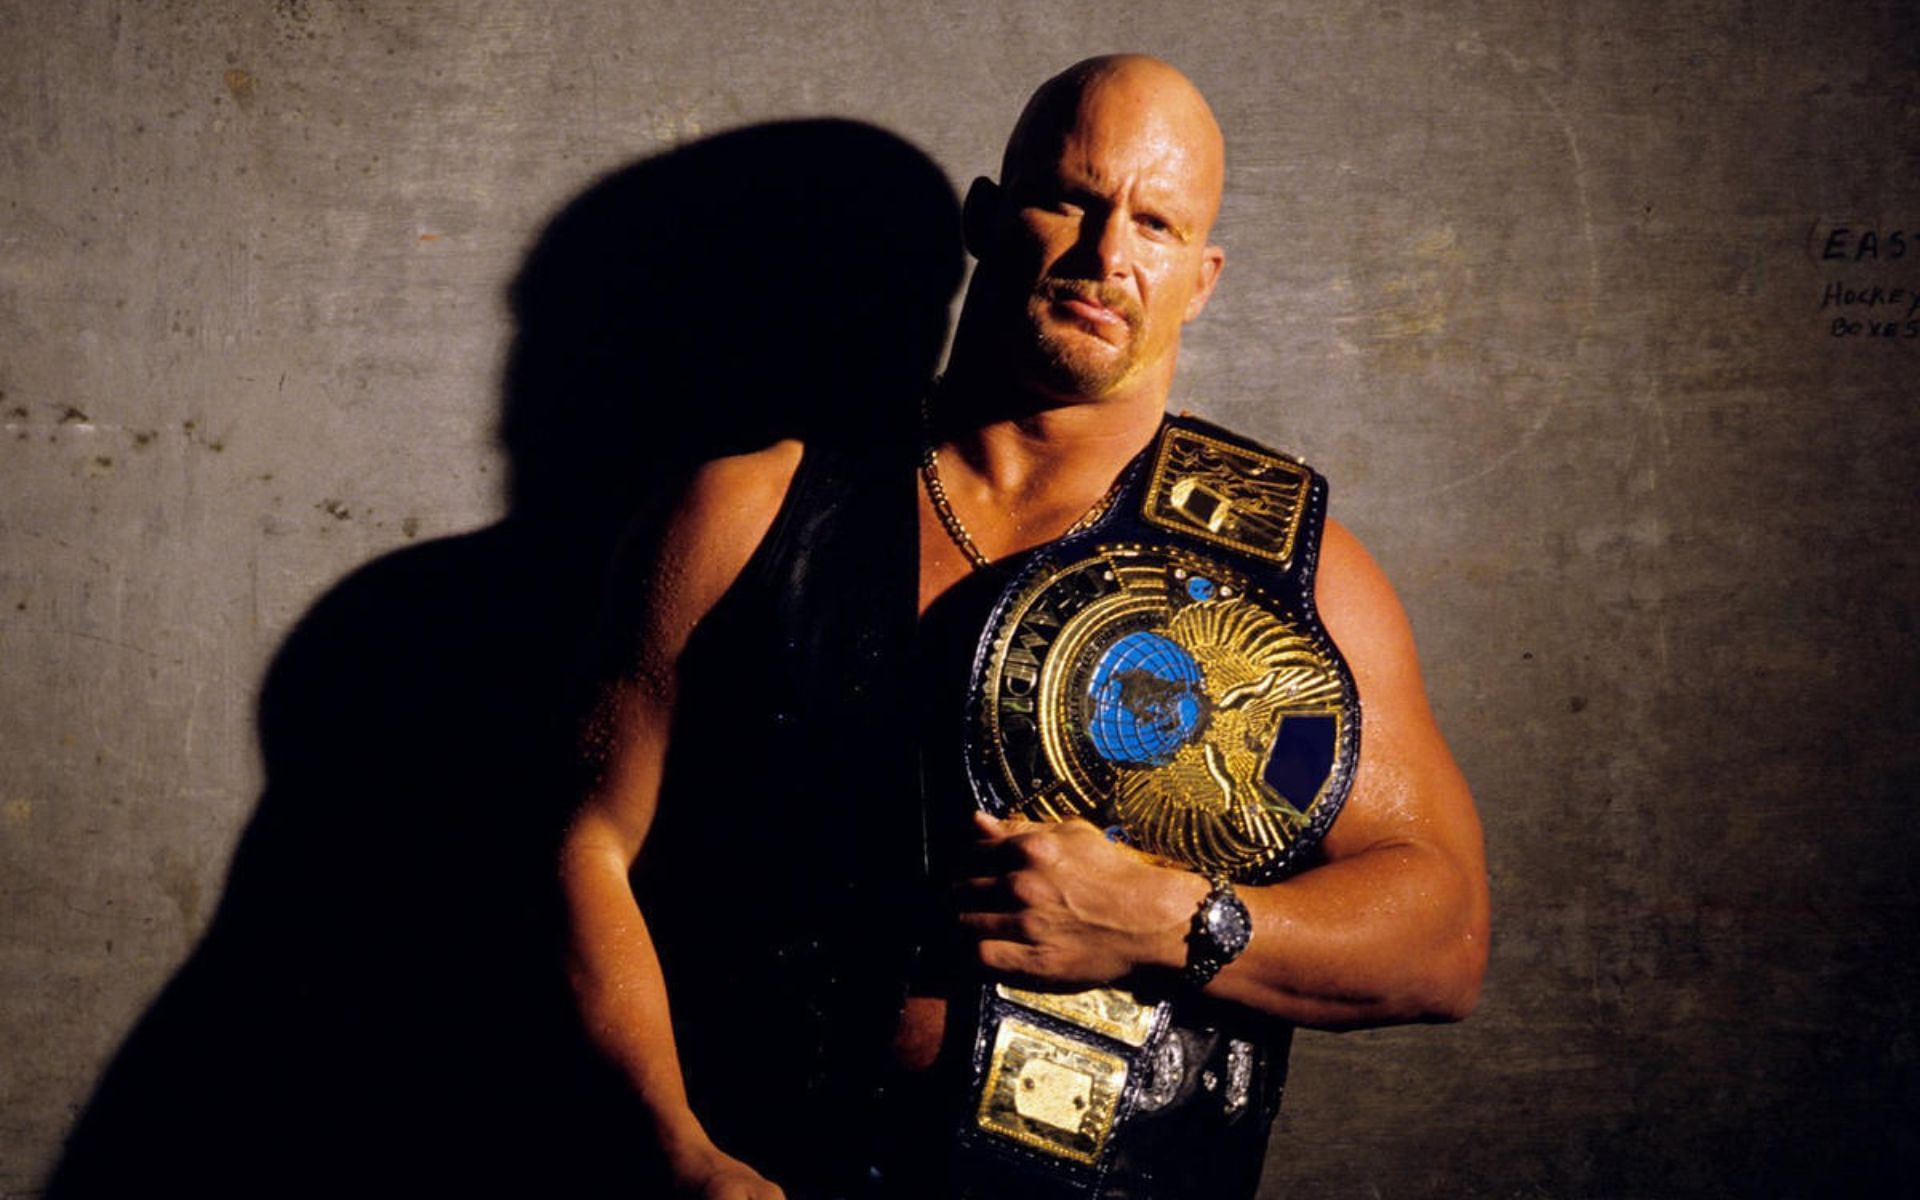 Stone Cold Steve Austin is a 6-time WWE Champion!